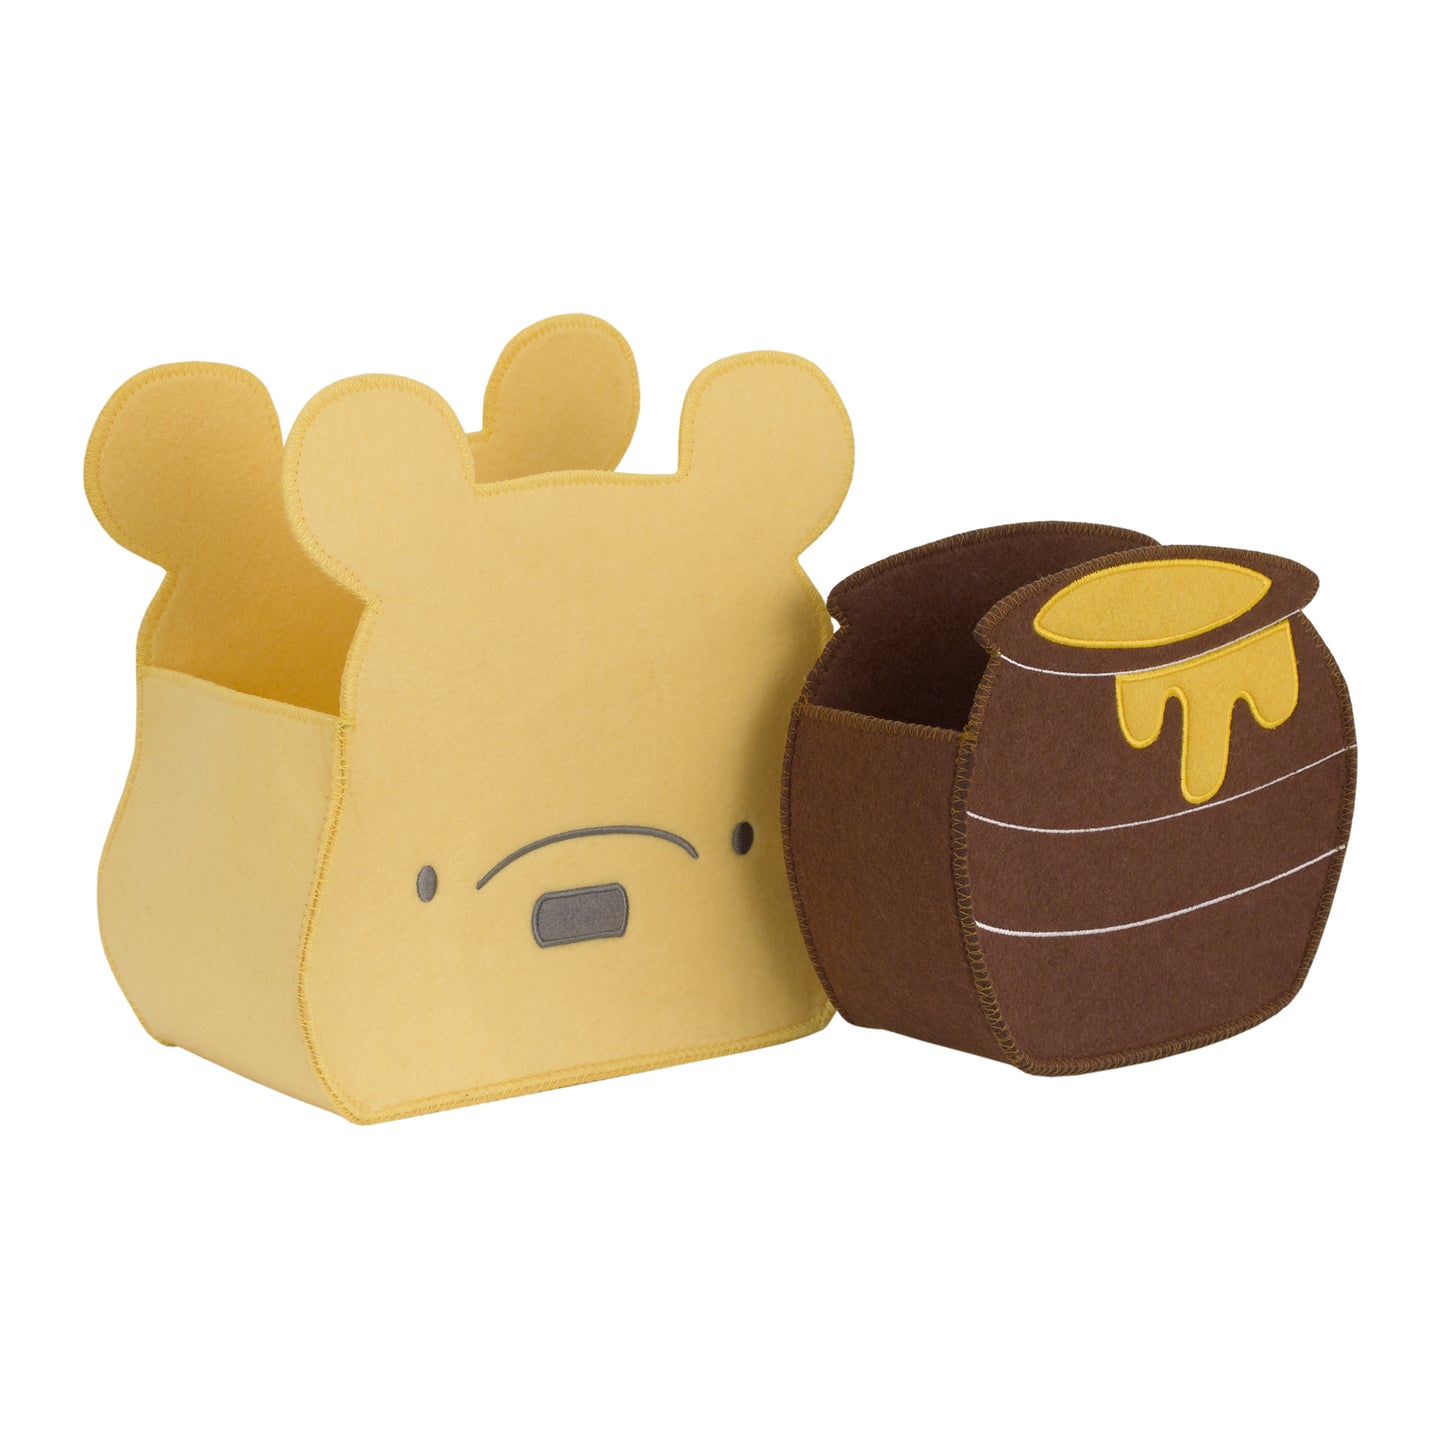 Disney Winnie the Pooh and Hunny Pot Yellow and Brown Two Piece Felt Storage Caddy - 1 Large, 1 Small